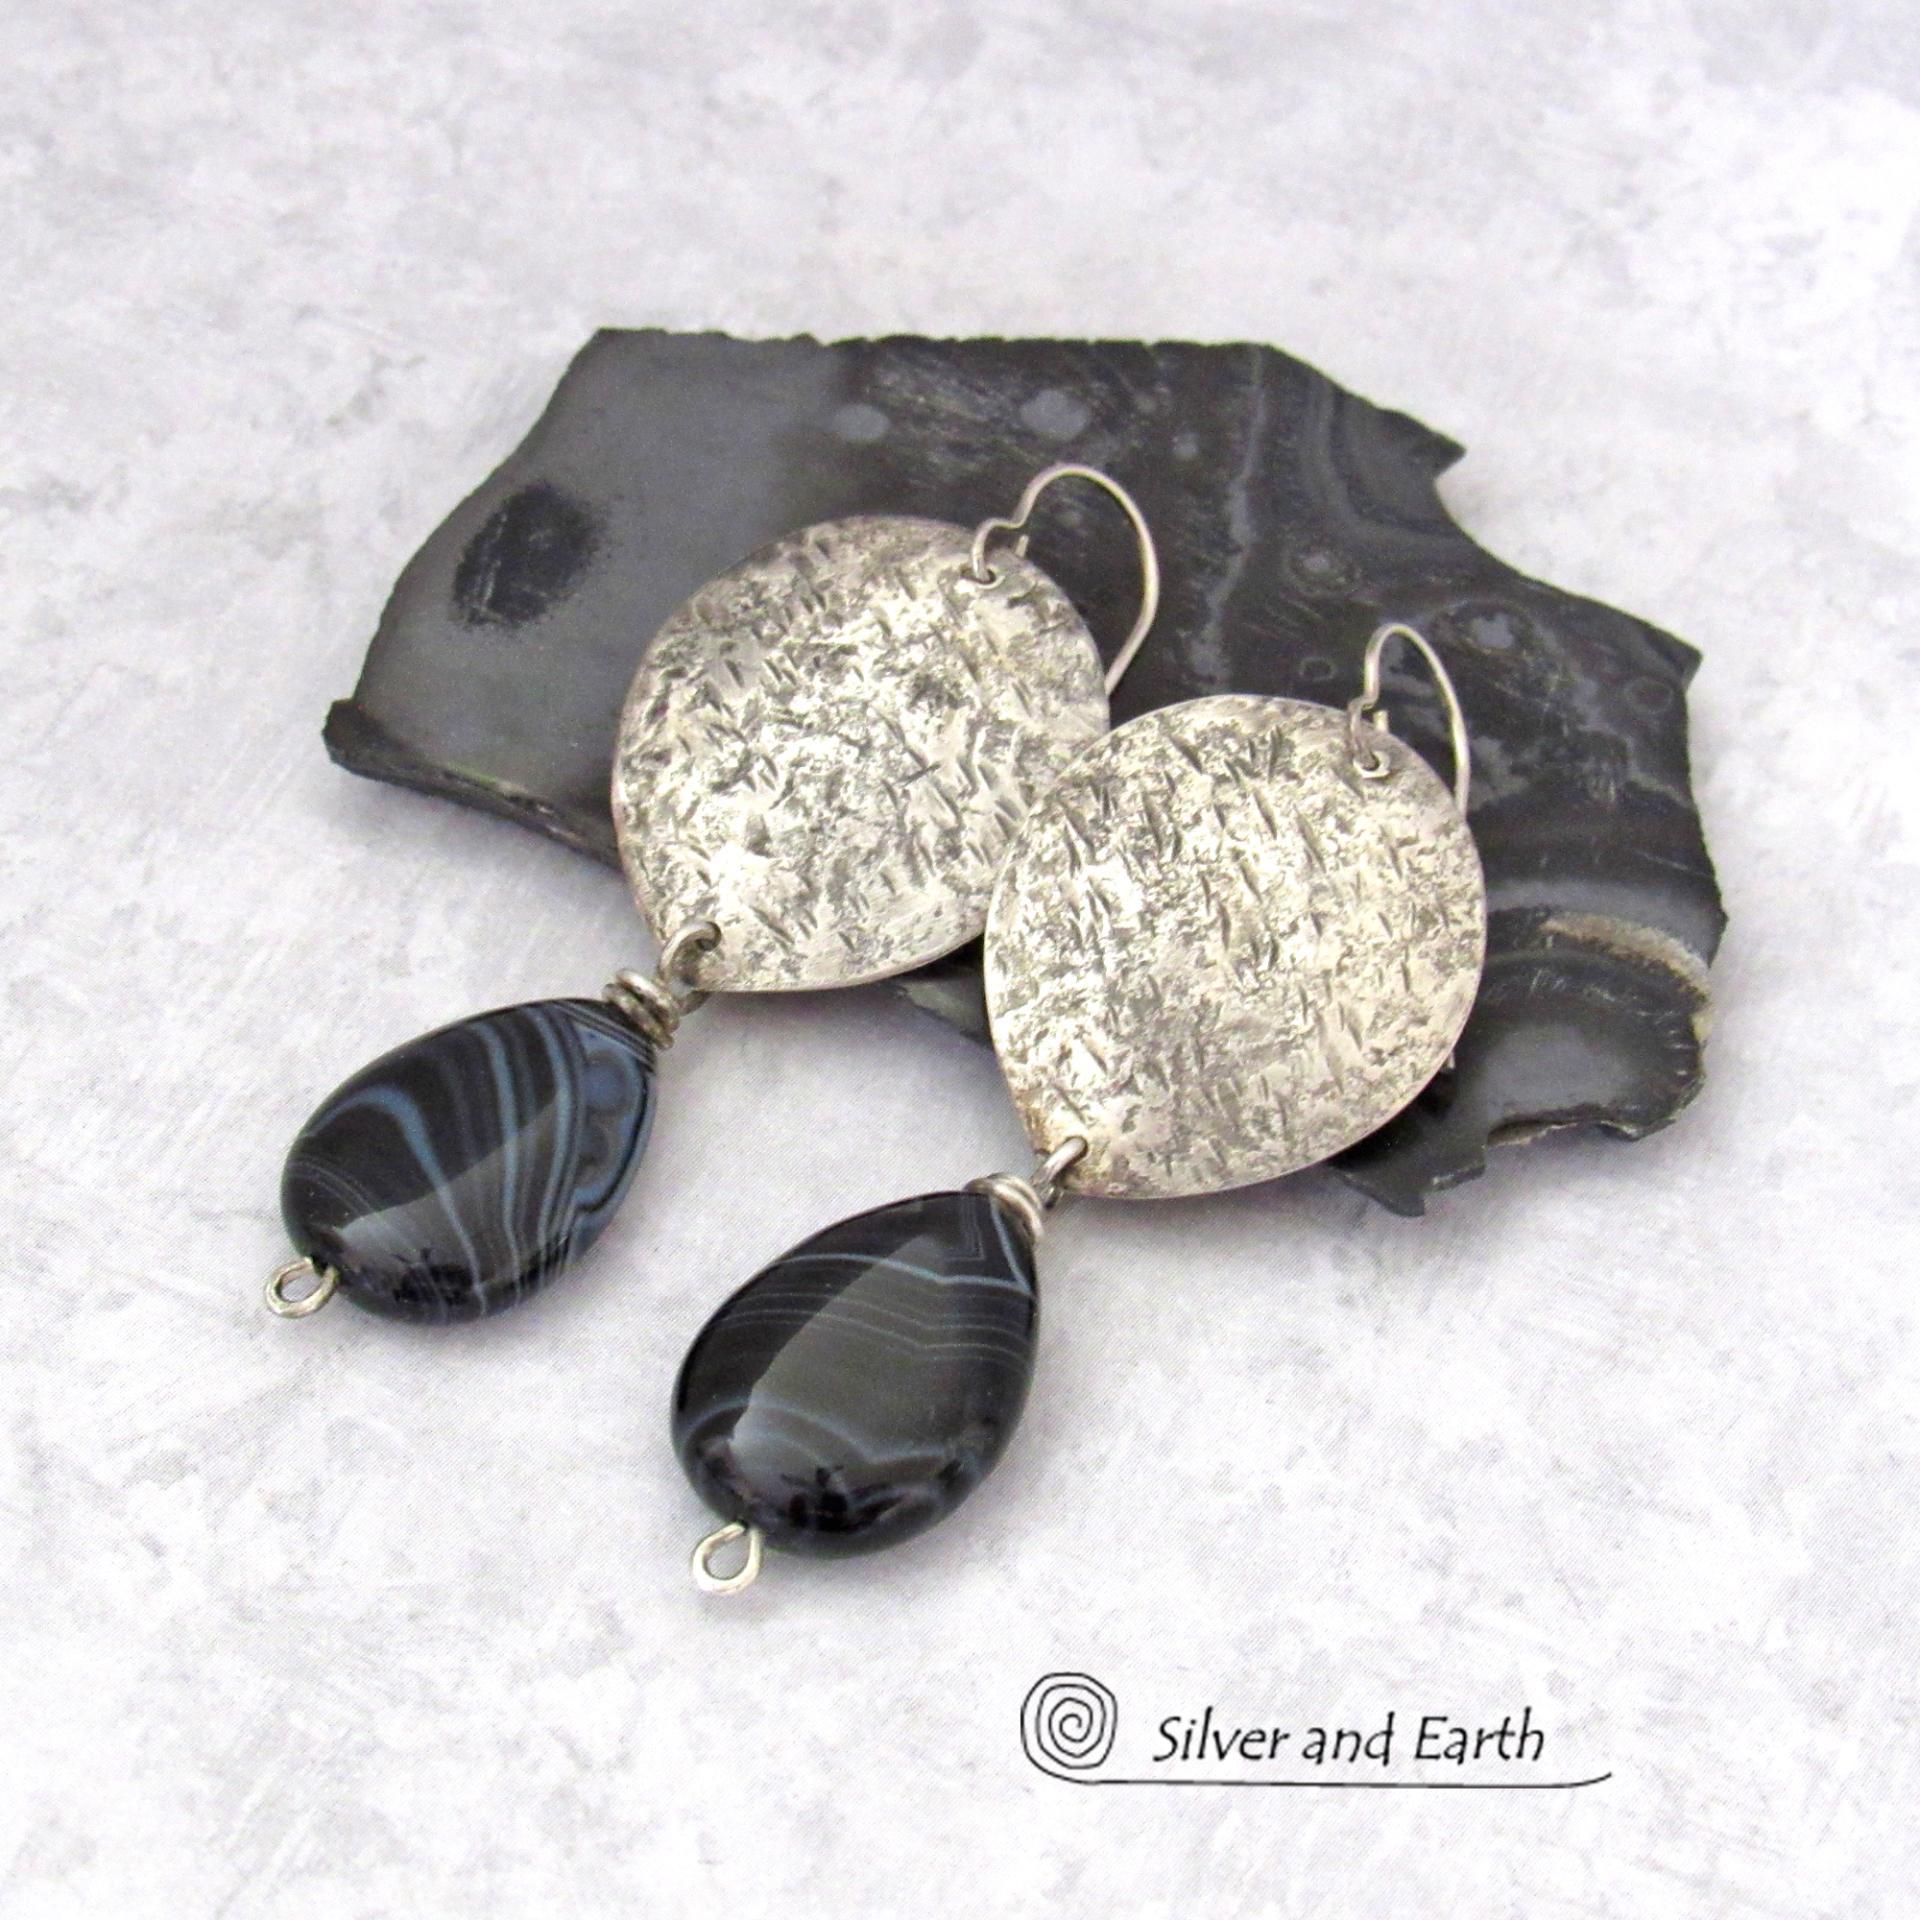 Textured Sterling Silver Earrings with Black Banded Agate Gemstones